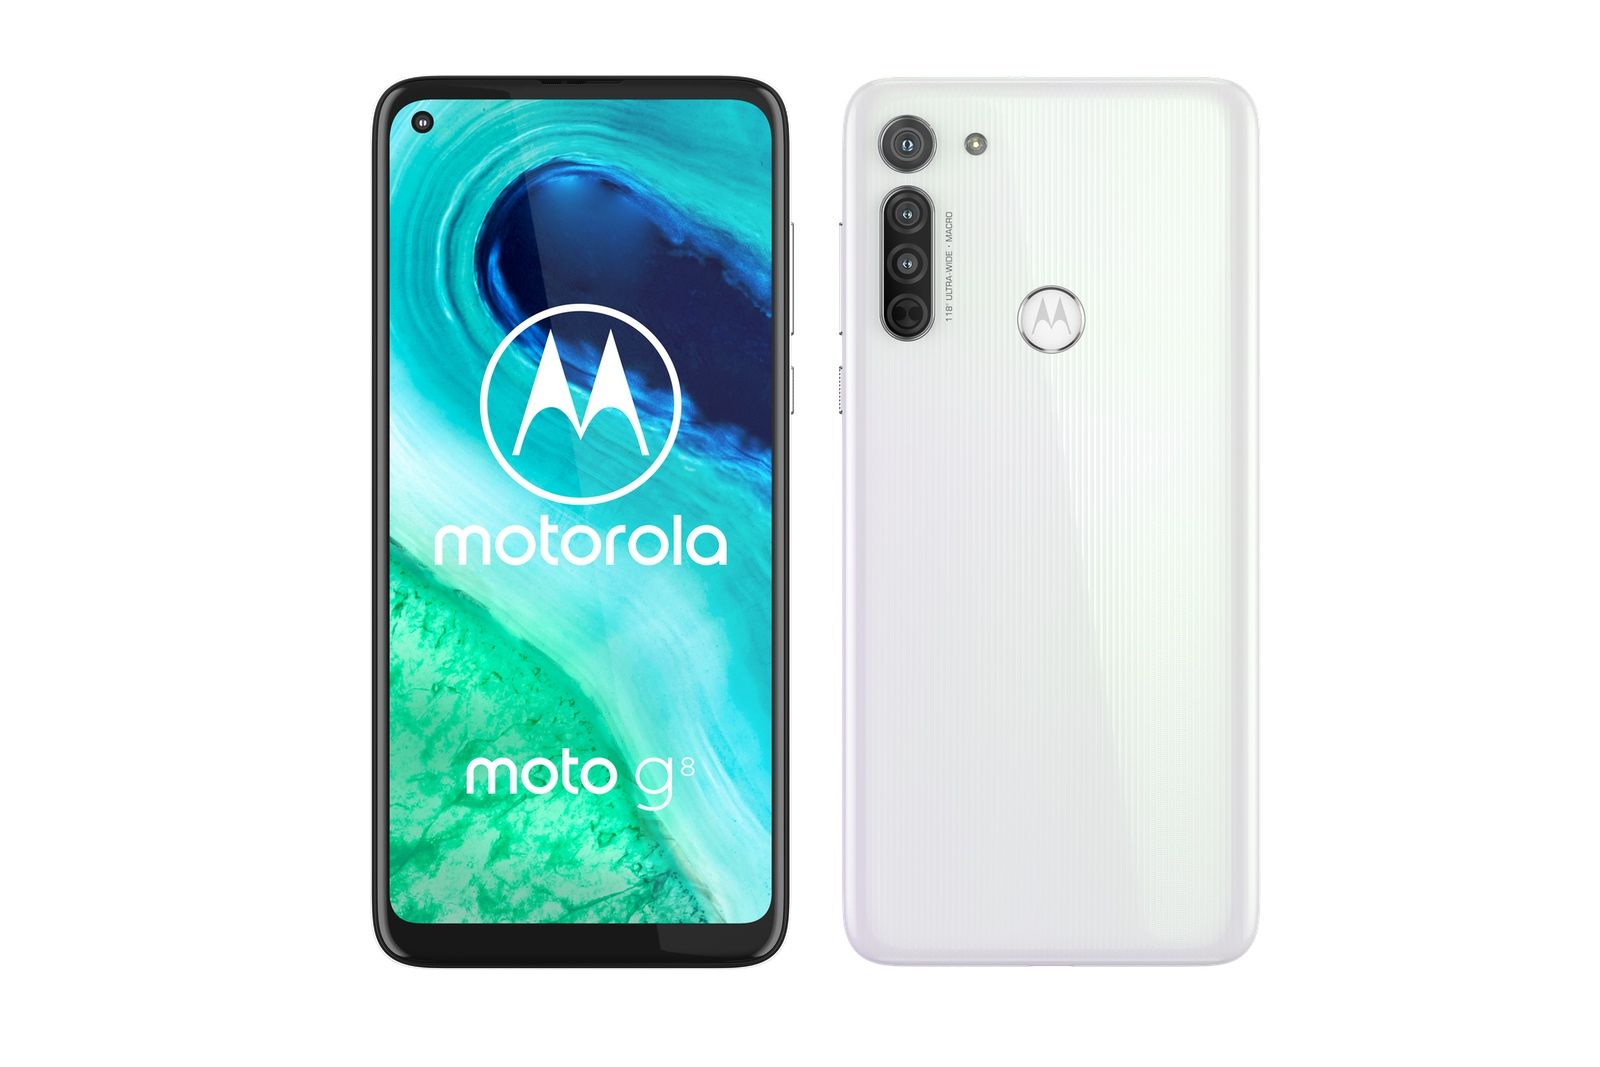 Gallery- Motorola Puts The Focus On Photography With Its New Moto G8 Smartphone image 3